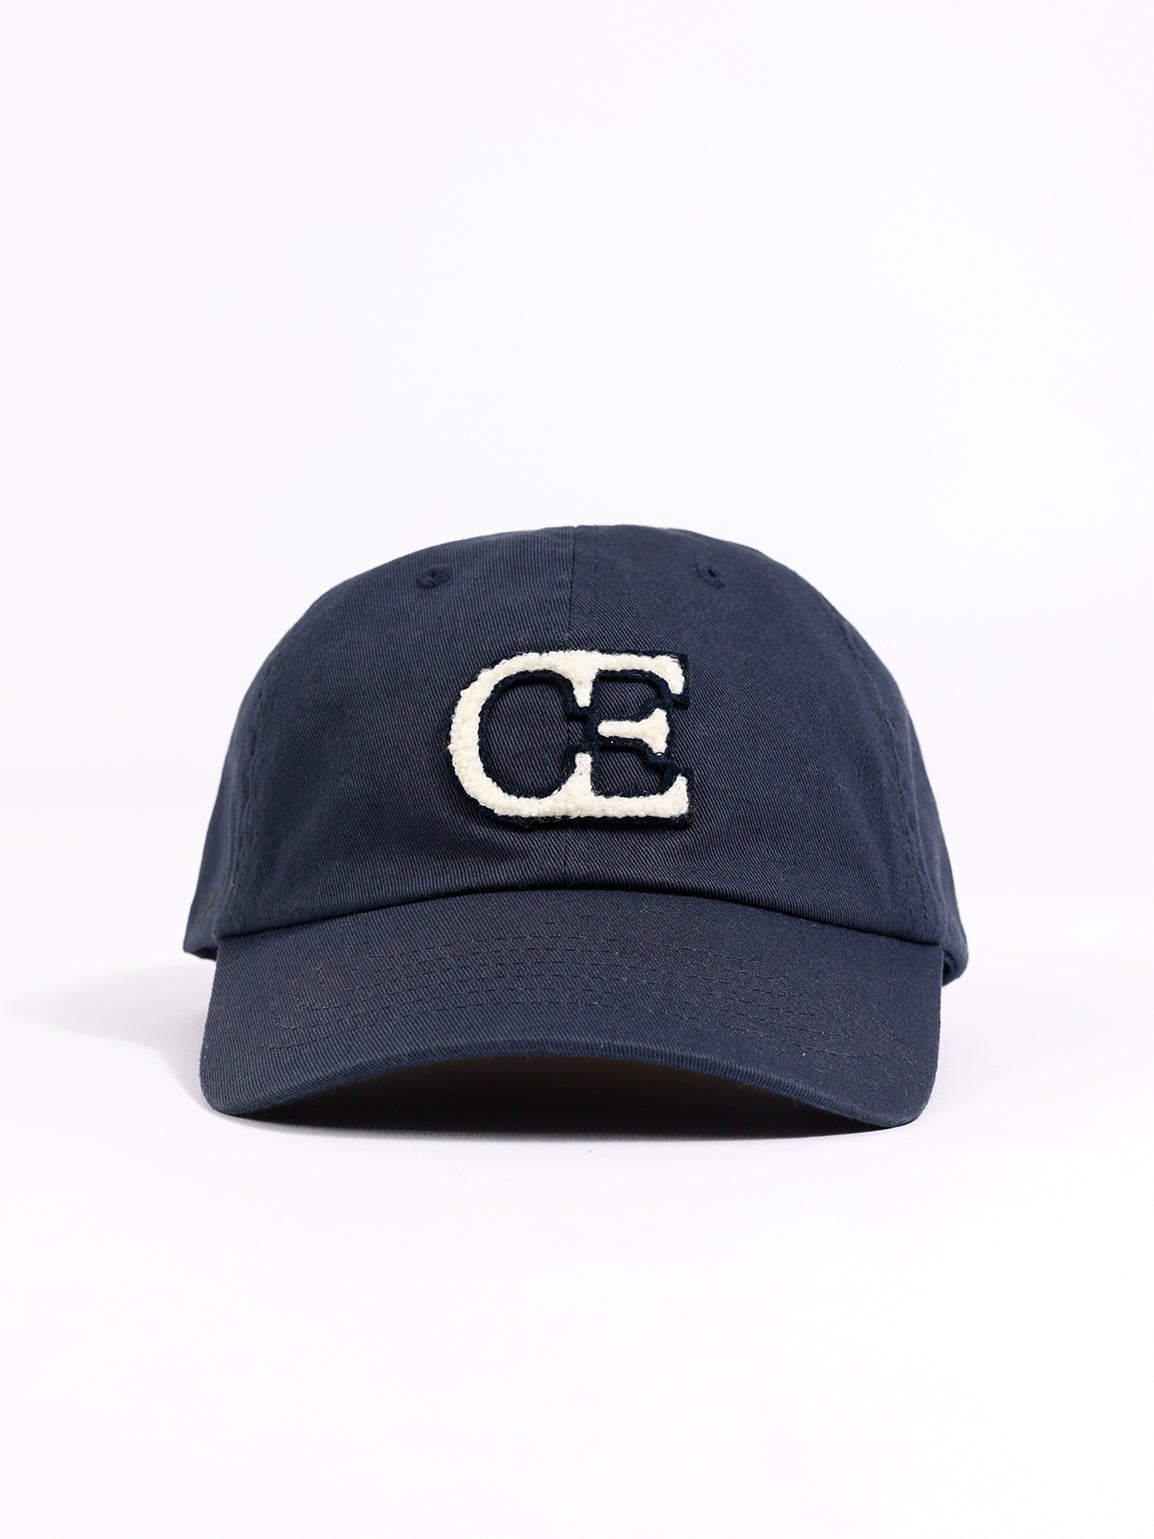 Wash navy vintage cap with white background |Color:Washed Navy